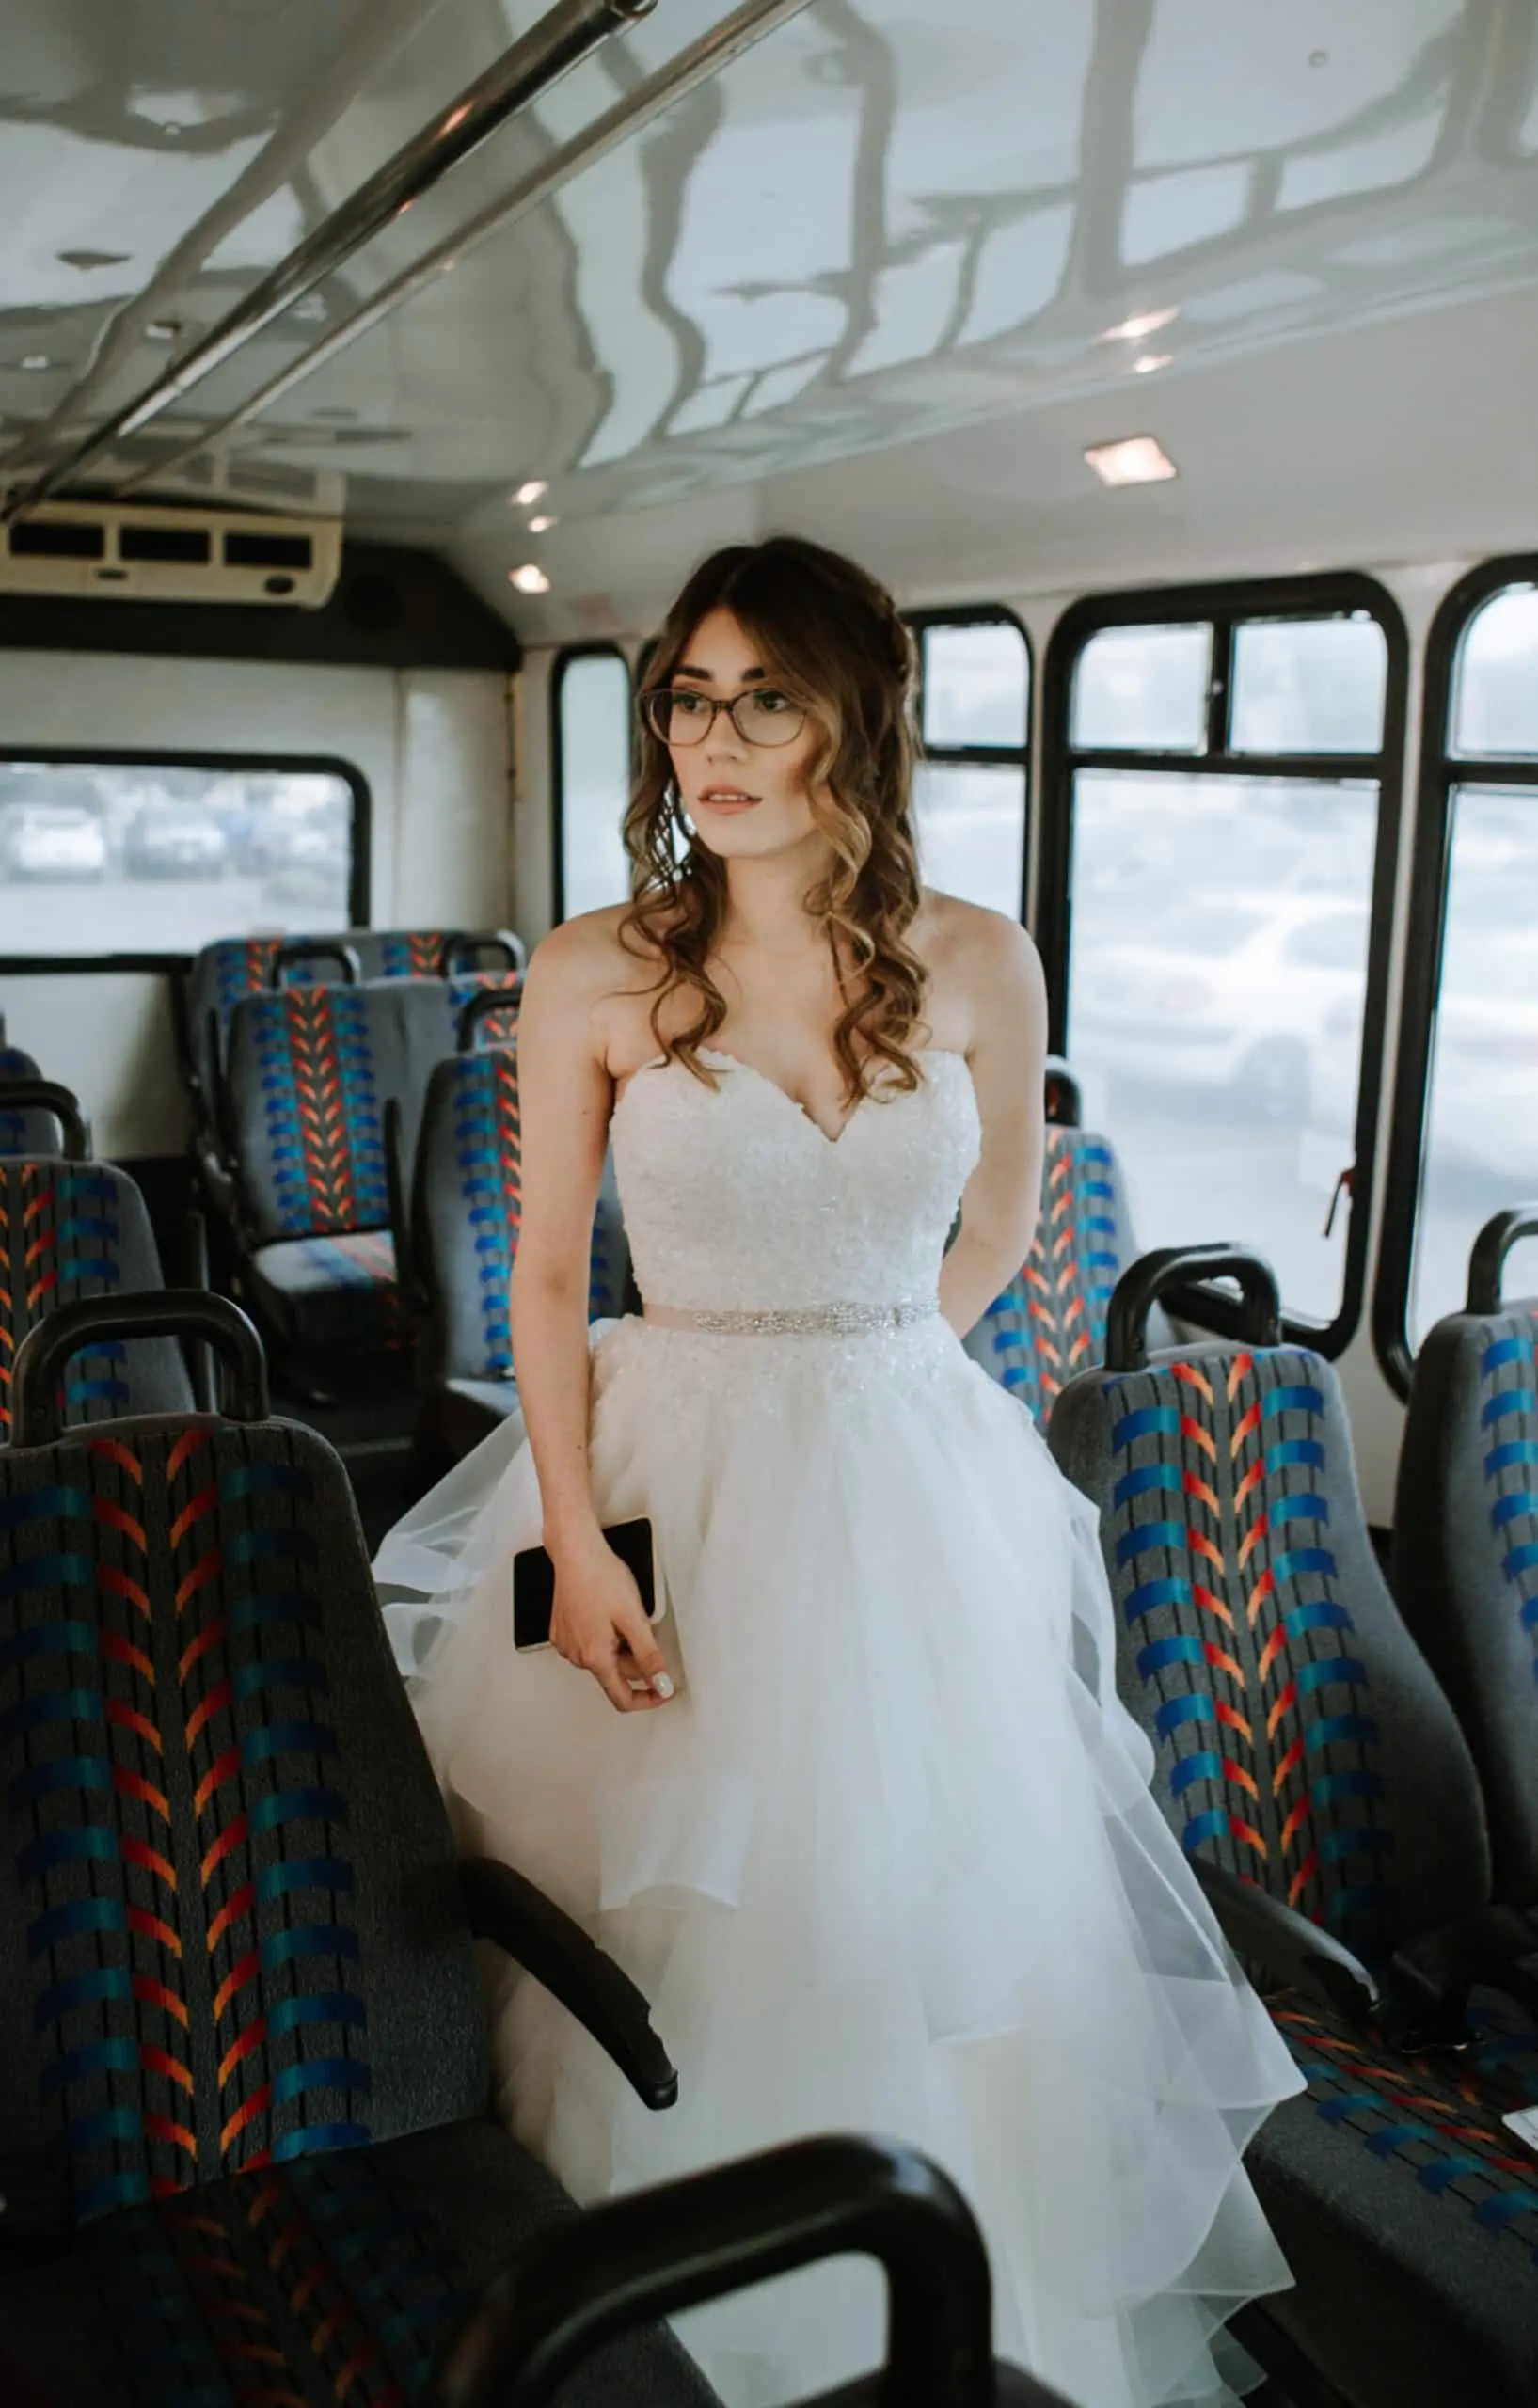 Should you wear glasses on your wedding day?